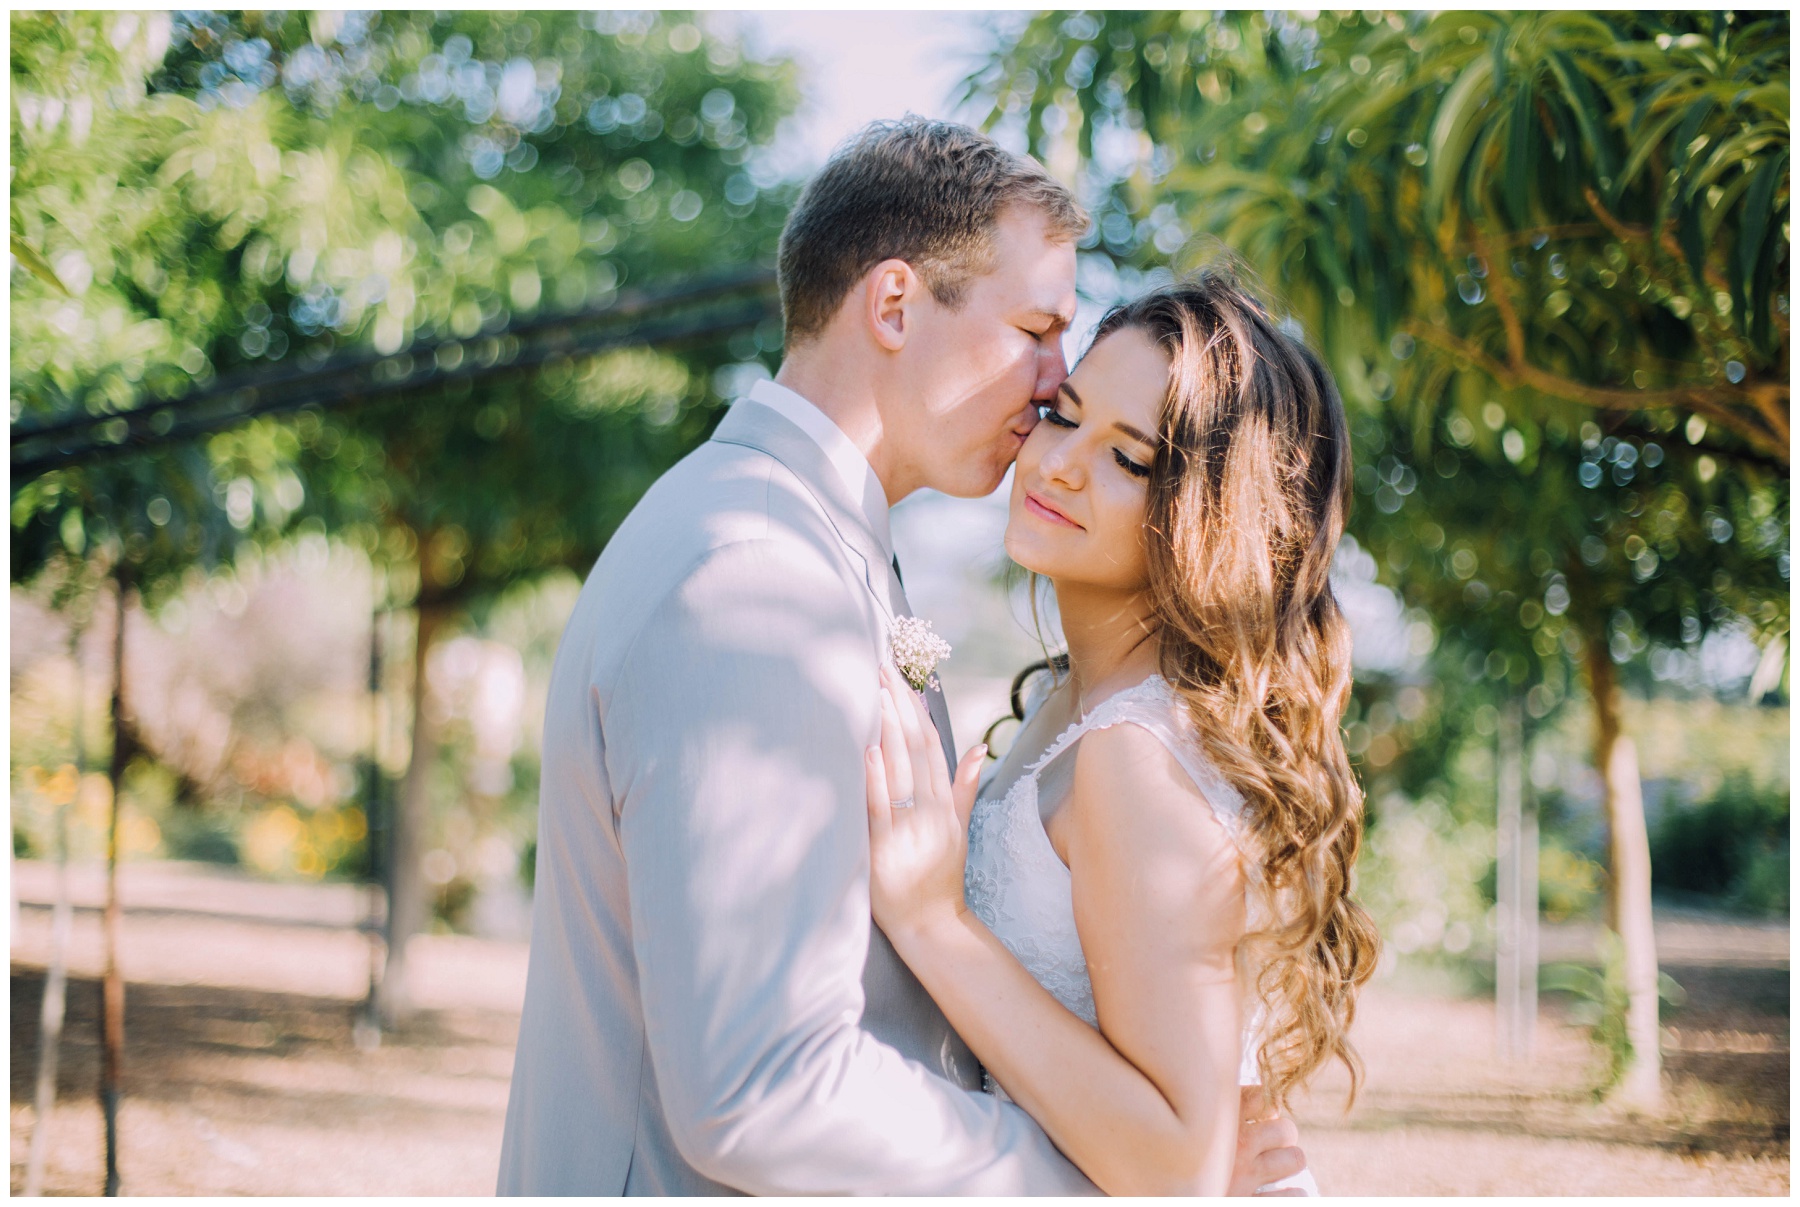 Ronel Kruger Cape Town Wedding and Lifestyle Photographer_8840.jpg